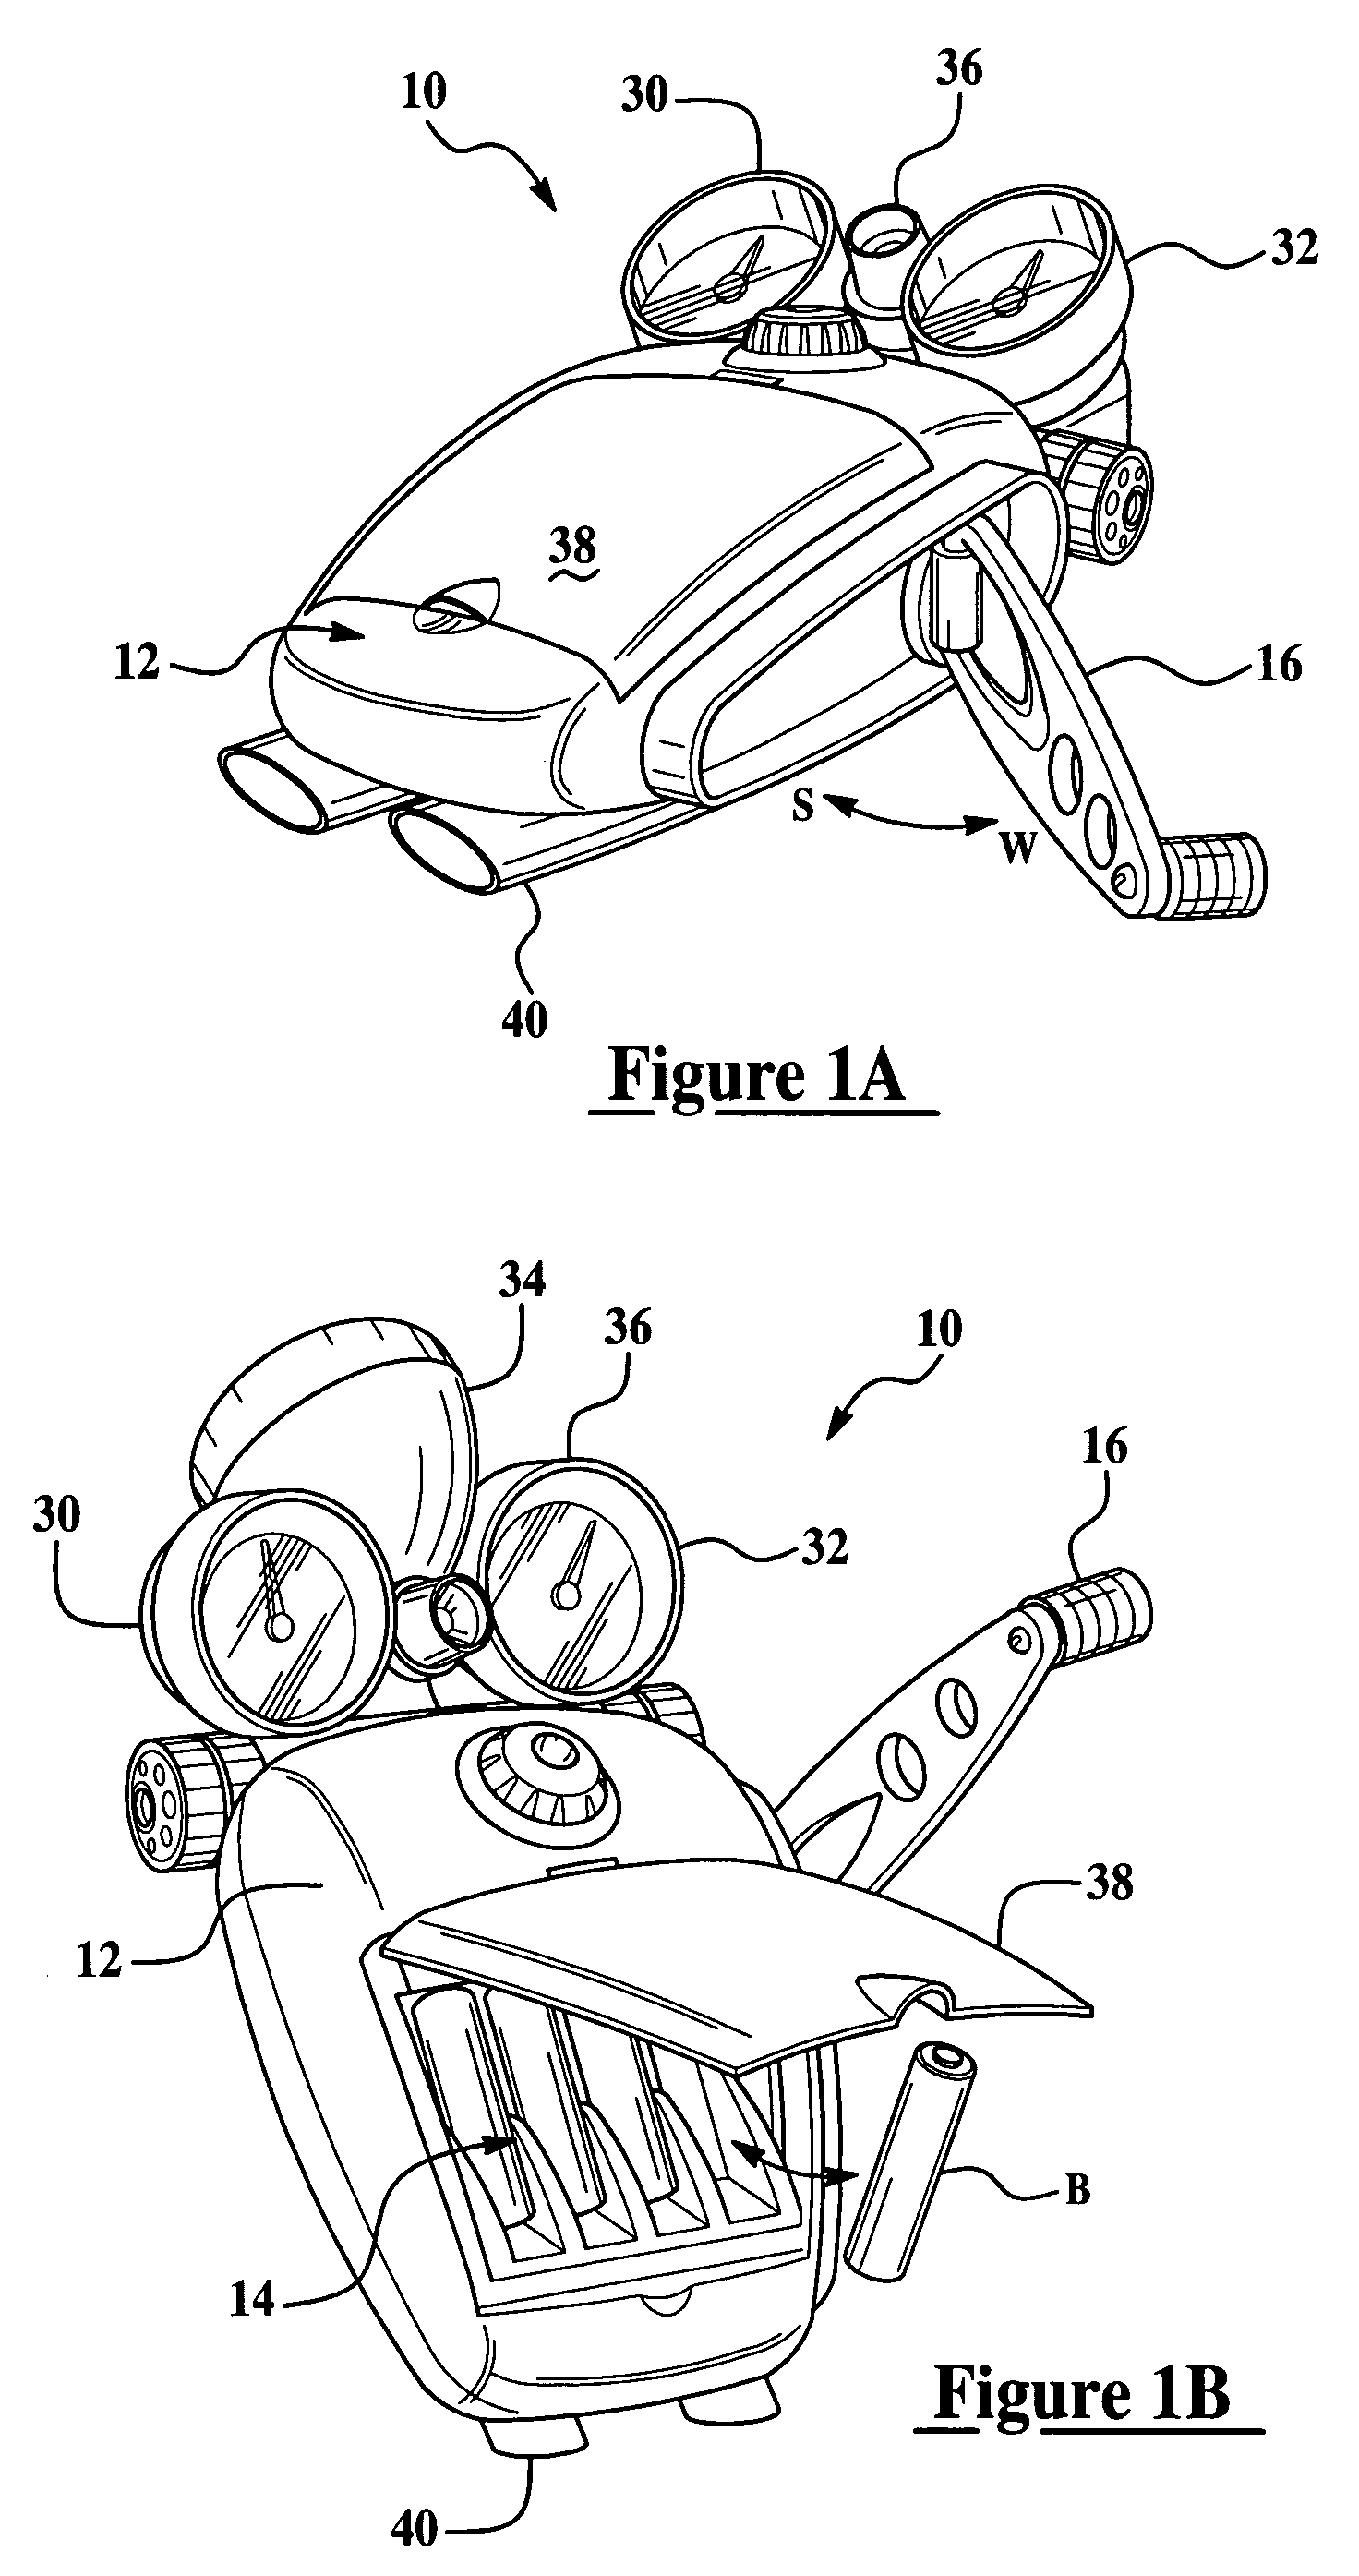 Amusement apparatus operative as a dynamo battery charger